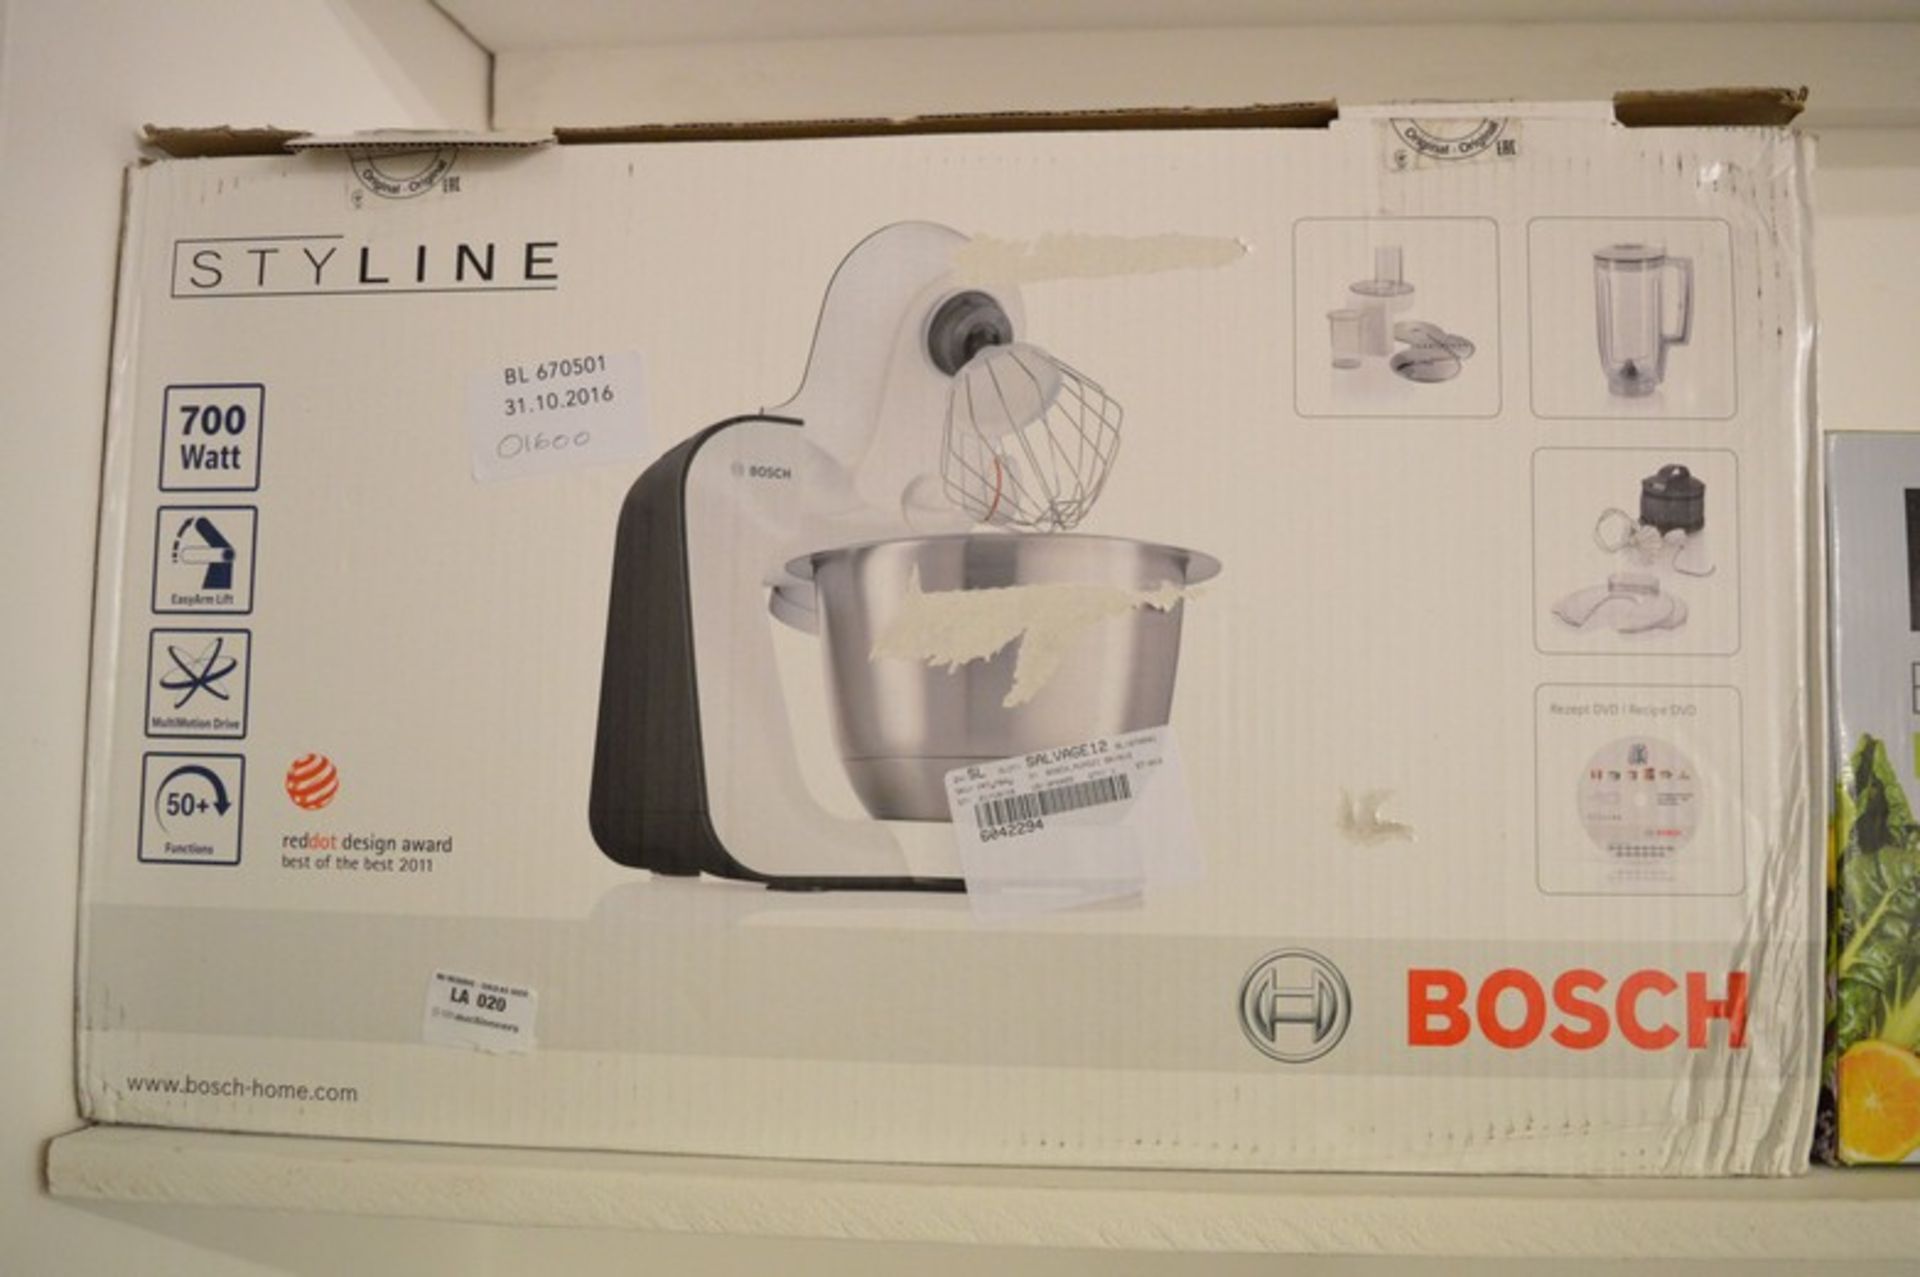 1 x BOXED BOSCH STYLINE 700W KITCHEN MIXER RRP £160 31.10.16 *PLEASE NOTE THAT THE BID PRICE IS